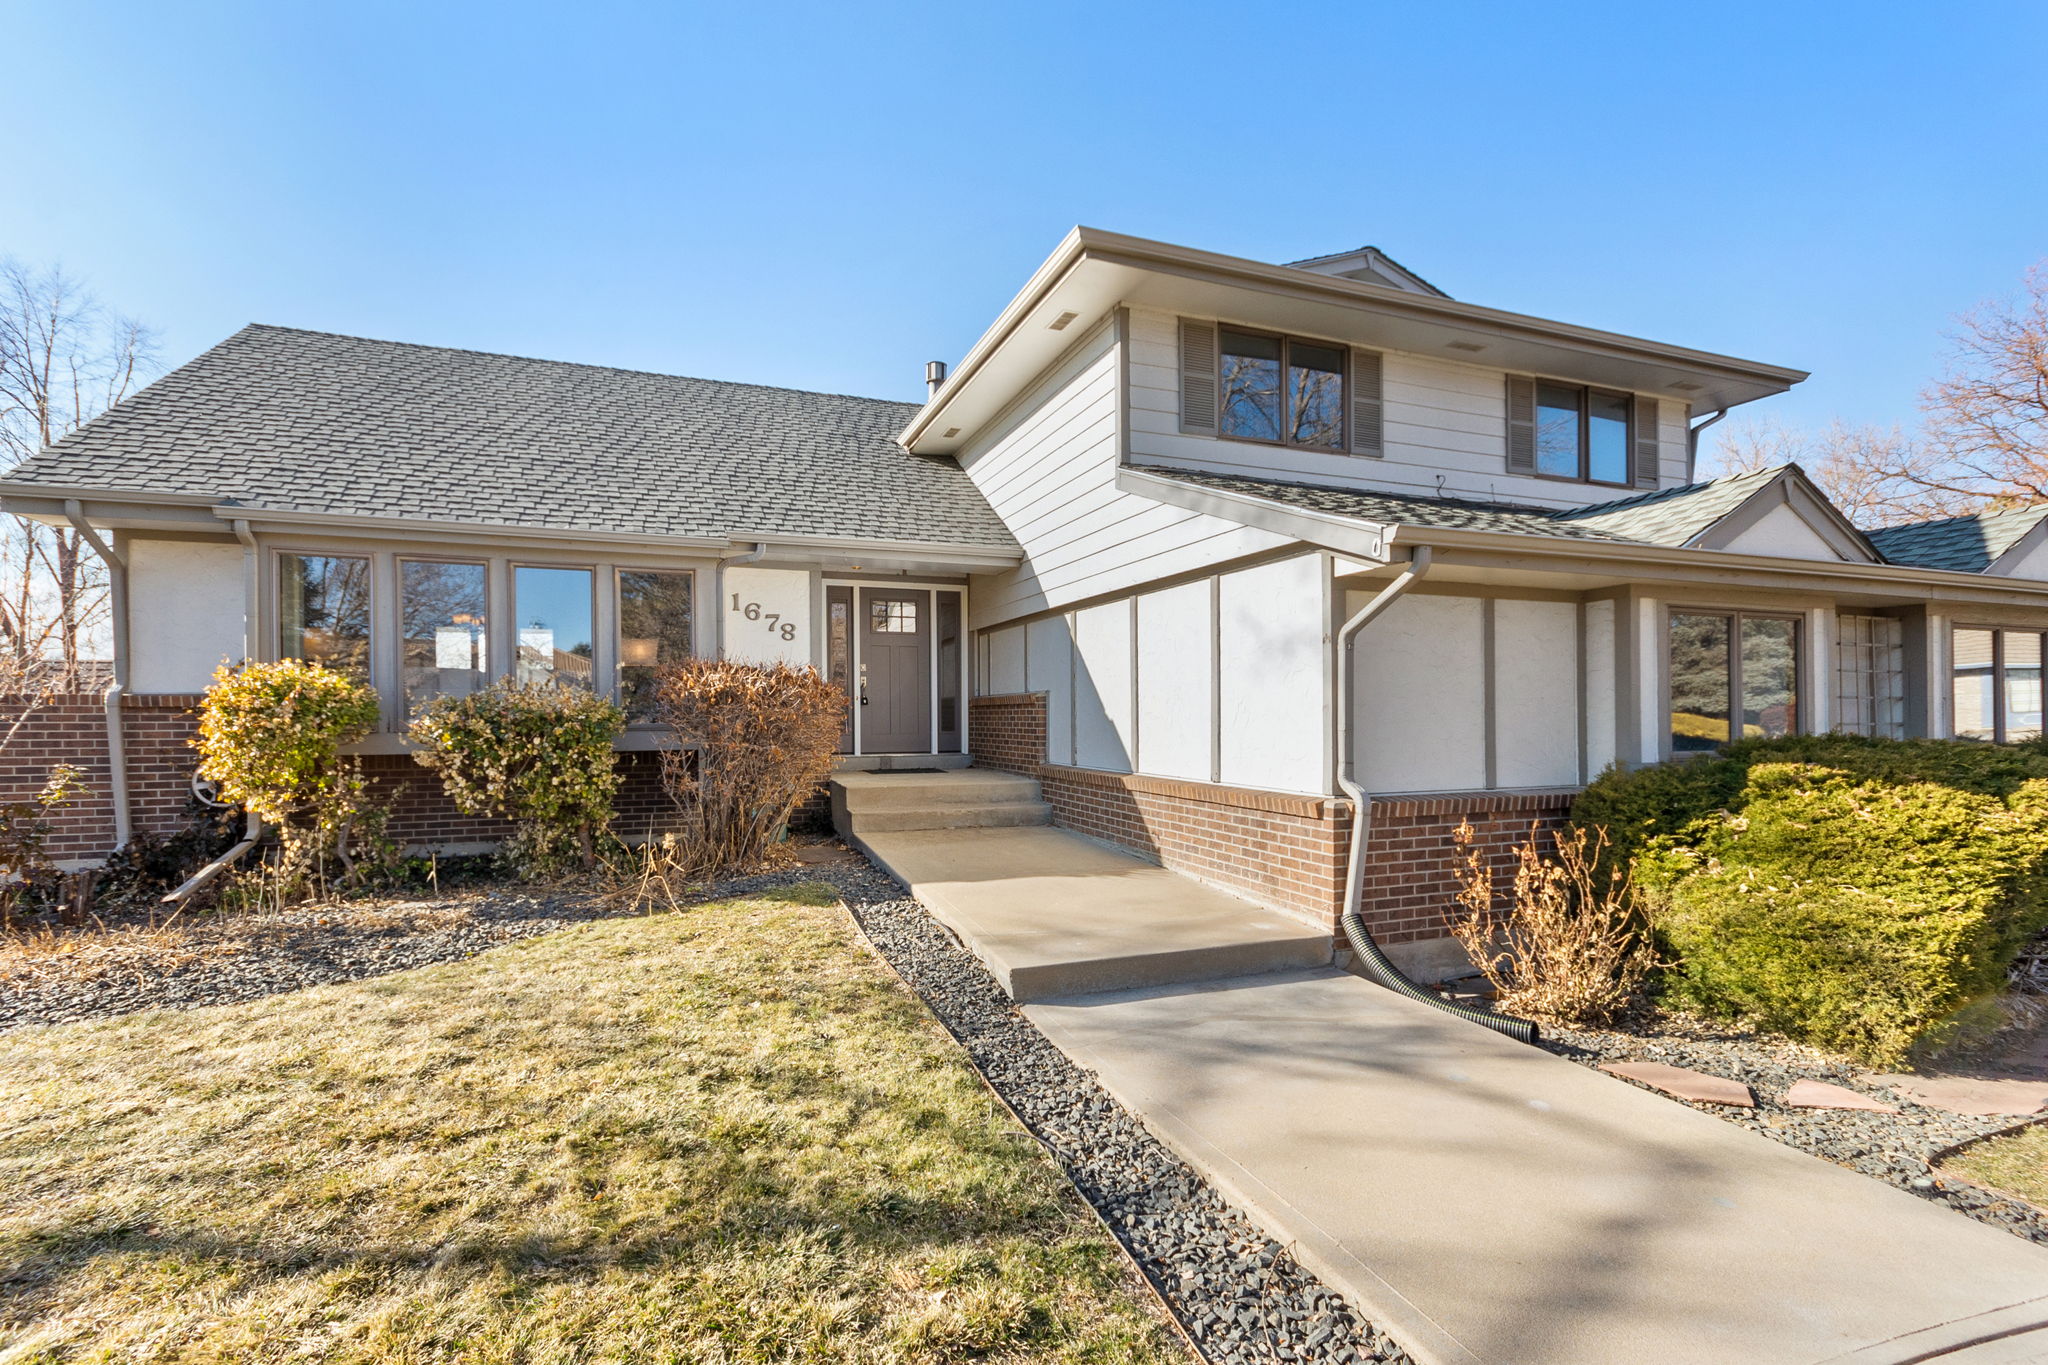  1678 W 115th Cir, Westminster, CO 80234, US Photo 3